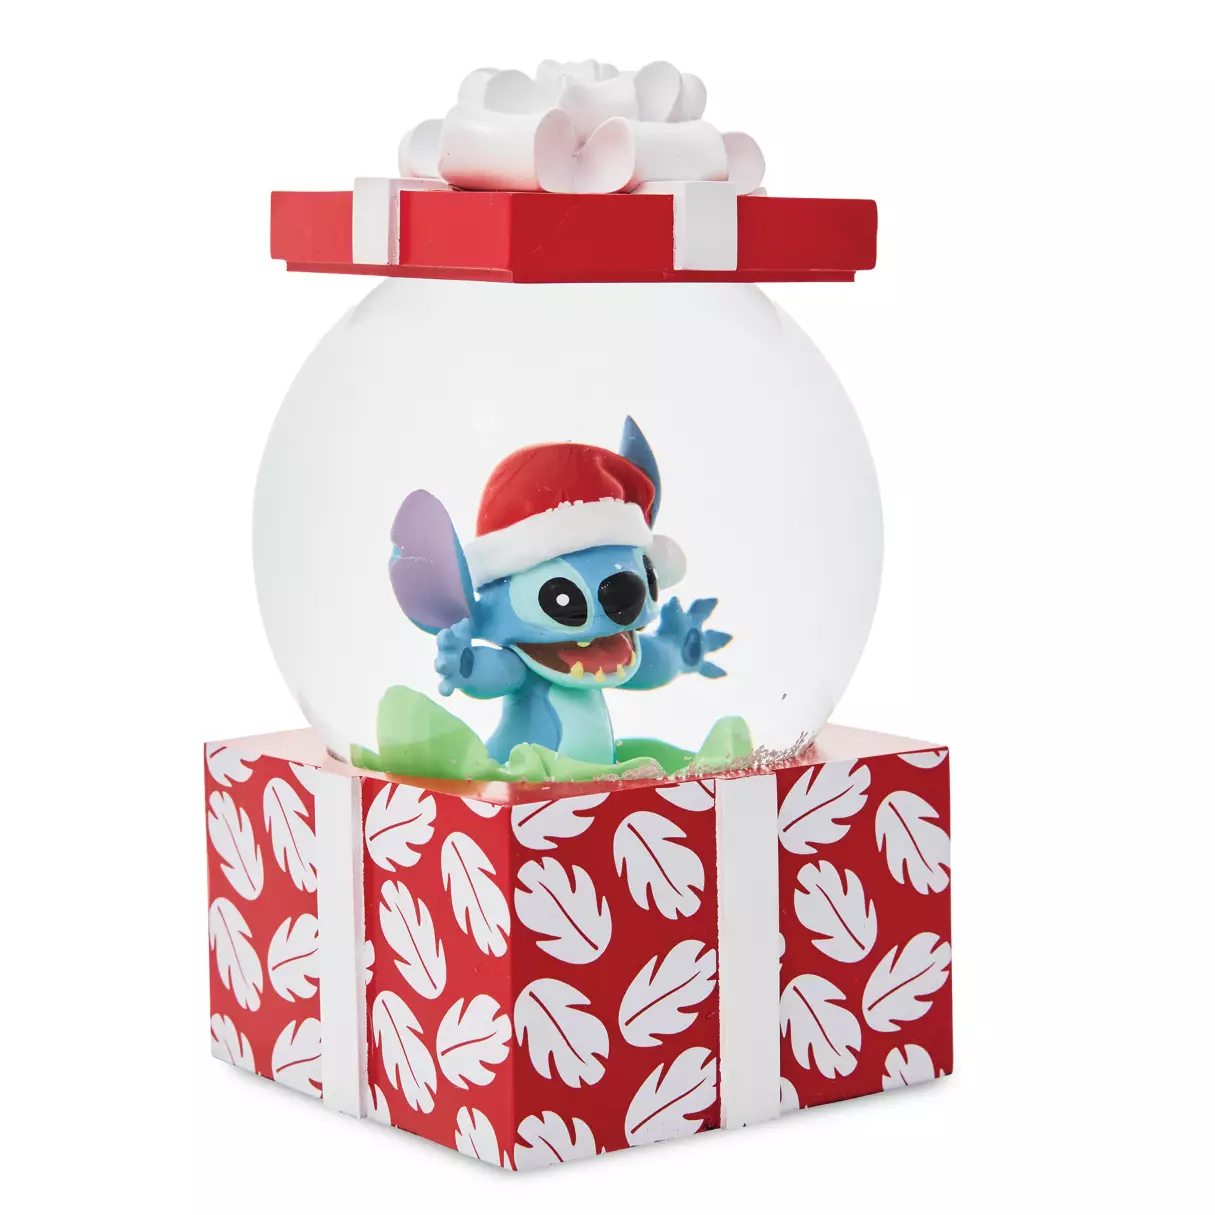 Amid tropical decoration, Stitch, dressed as ''old St. Nick,'' pops out from a festive holiday gift box. A snow flurry follows when the snow globe is shaken, making this a merry Christmas heirloom to treasure for years to come. Magic in the details Fully sculpted Santa Stitch figure inside globe Shake to see a shower of snow in Waterball ''Wrapped gift box'' base Box lid and bow topper Inspired by Disney's Lilo & Stitch (2002) By Department 56